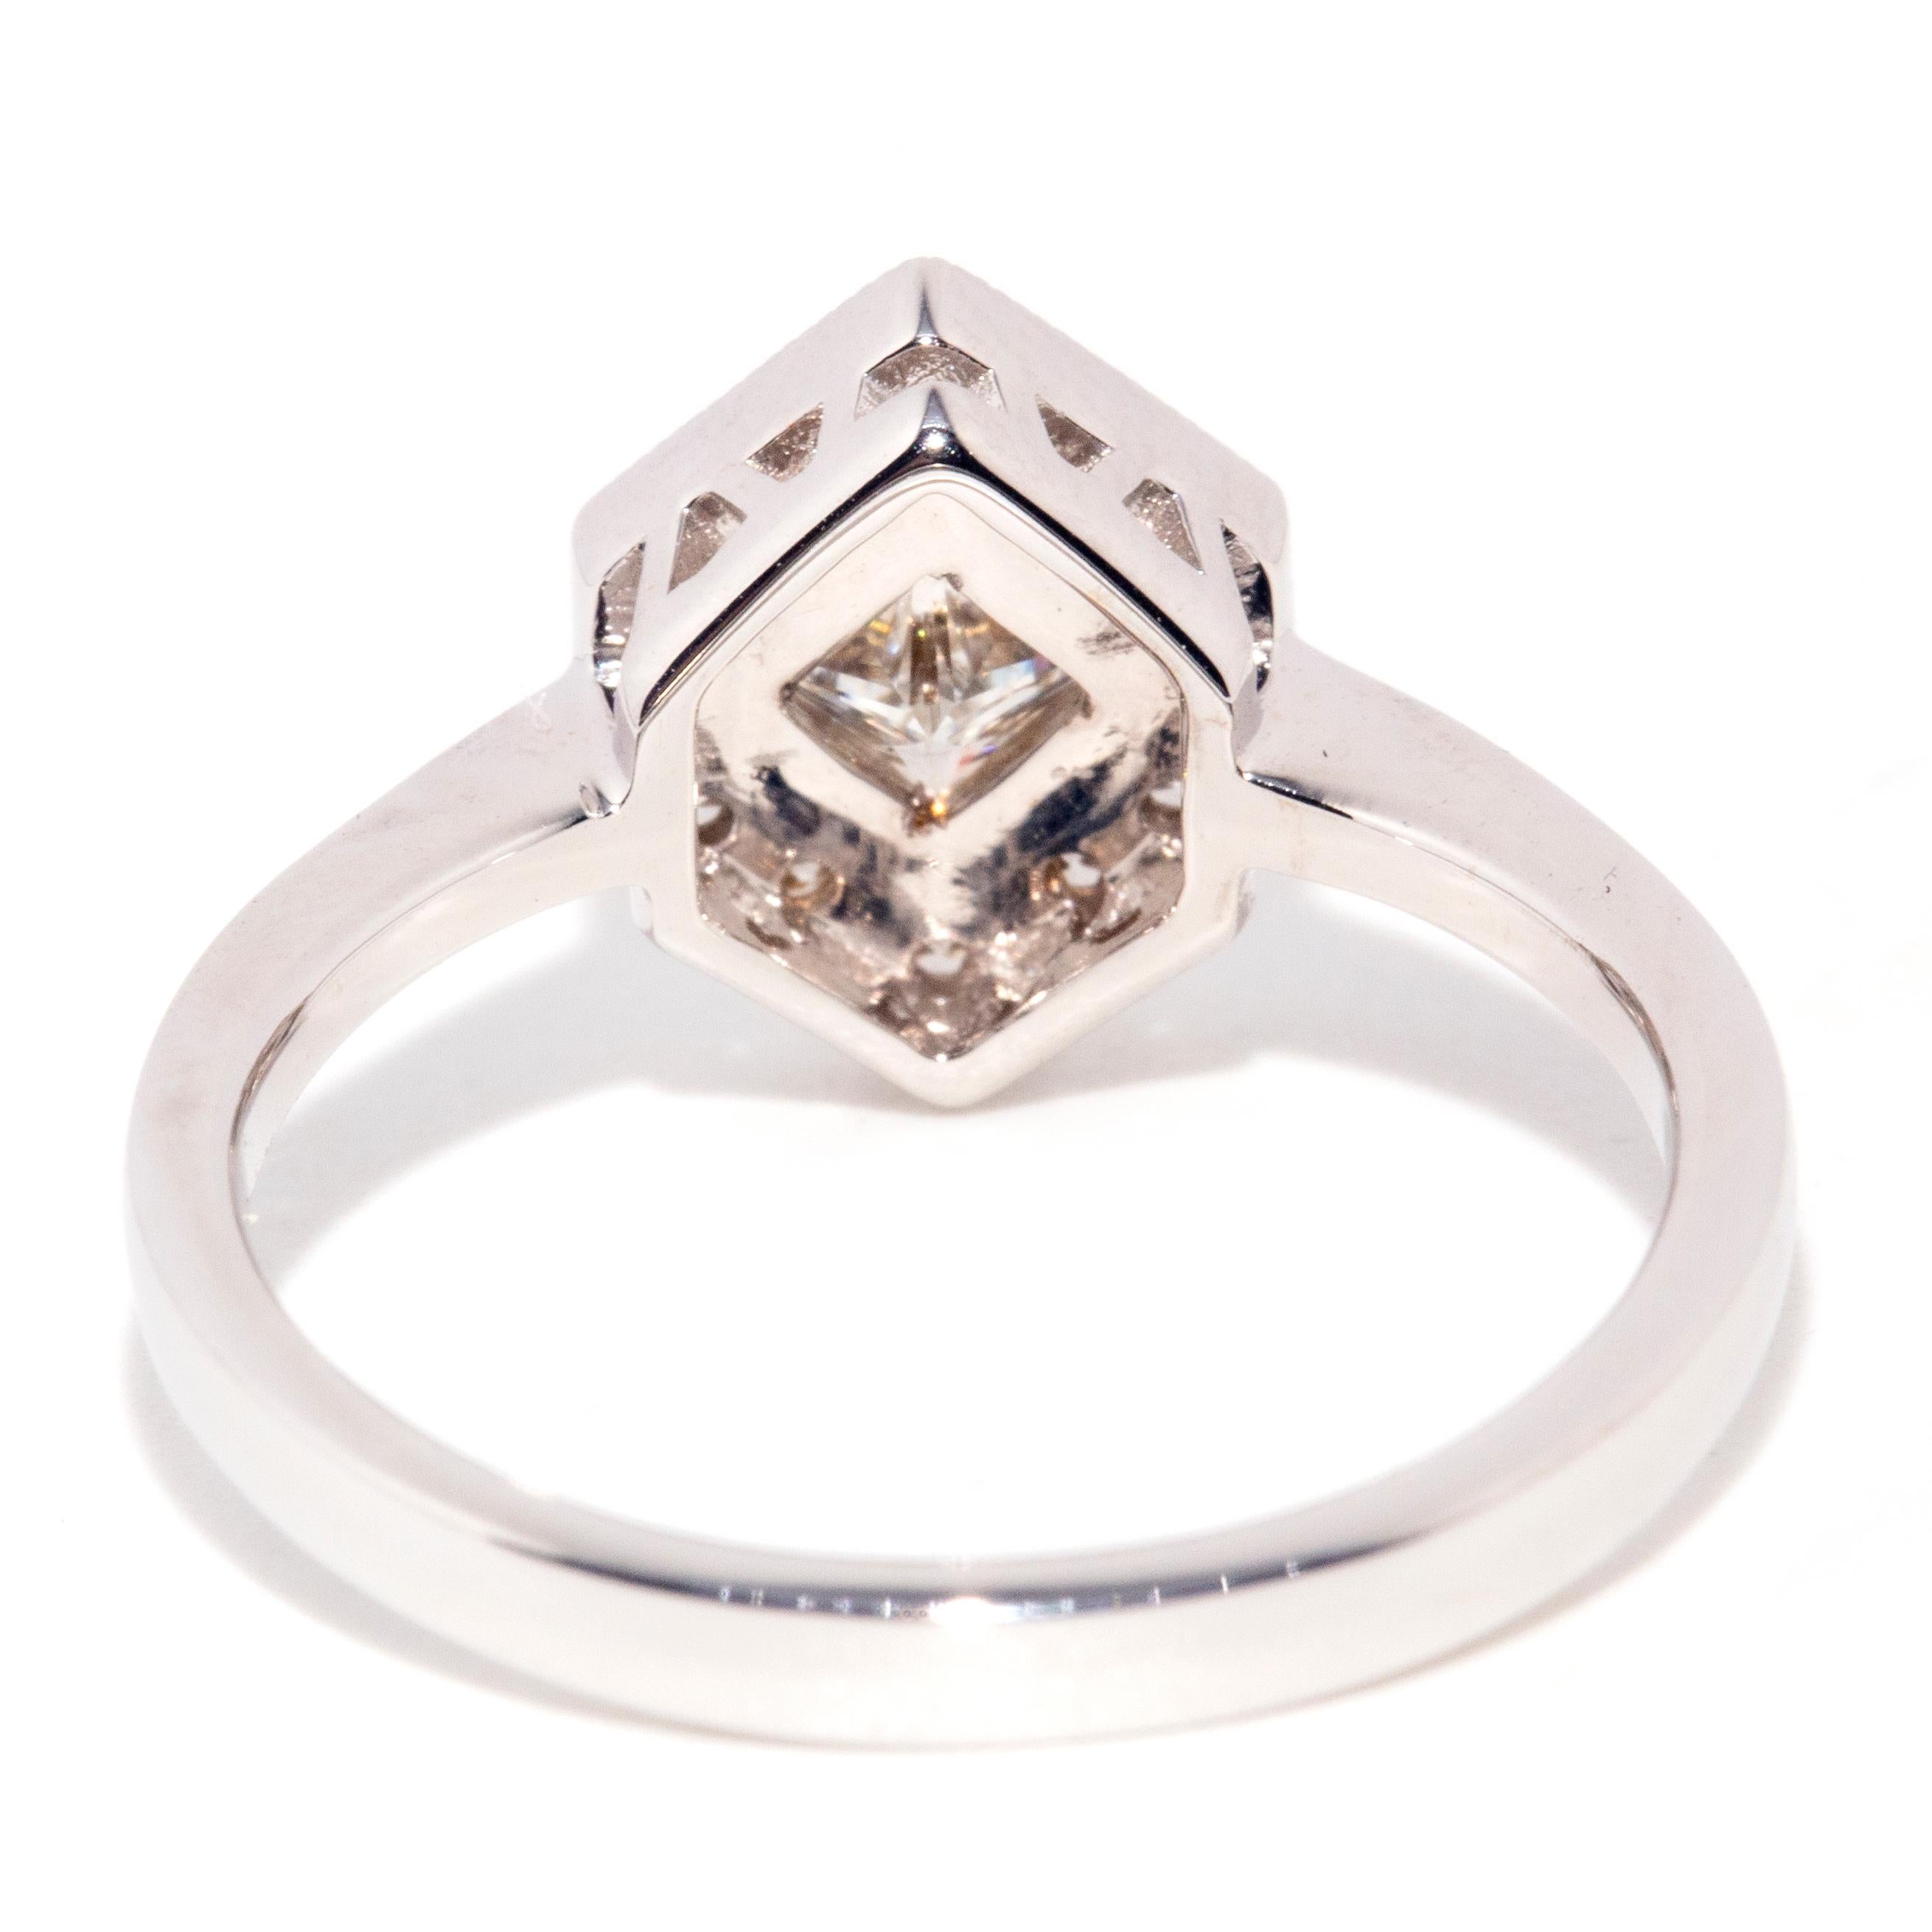 Contemporary 0.30 Carat Princess Cut Diamond 18 Carat White Gold Cluster Ring For Sale 3